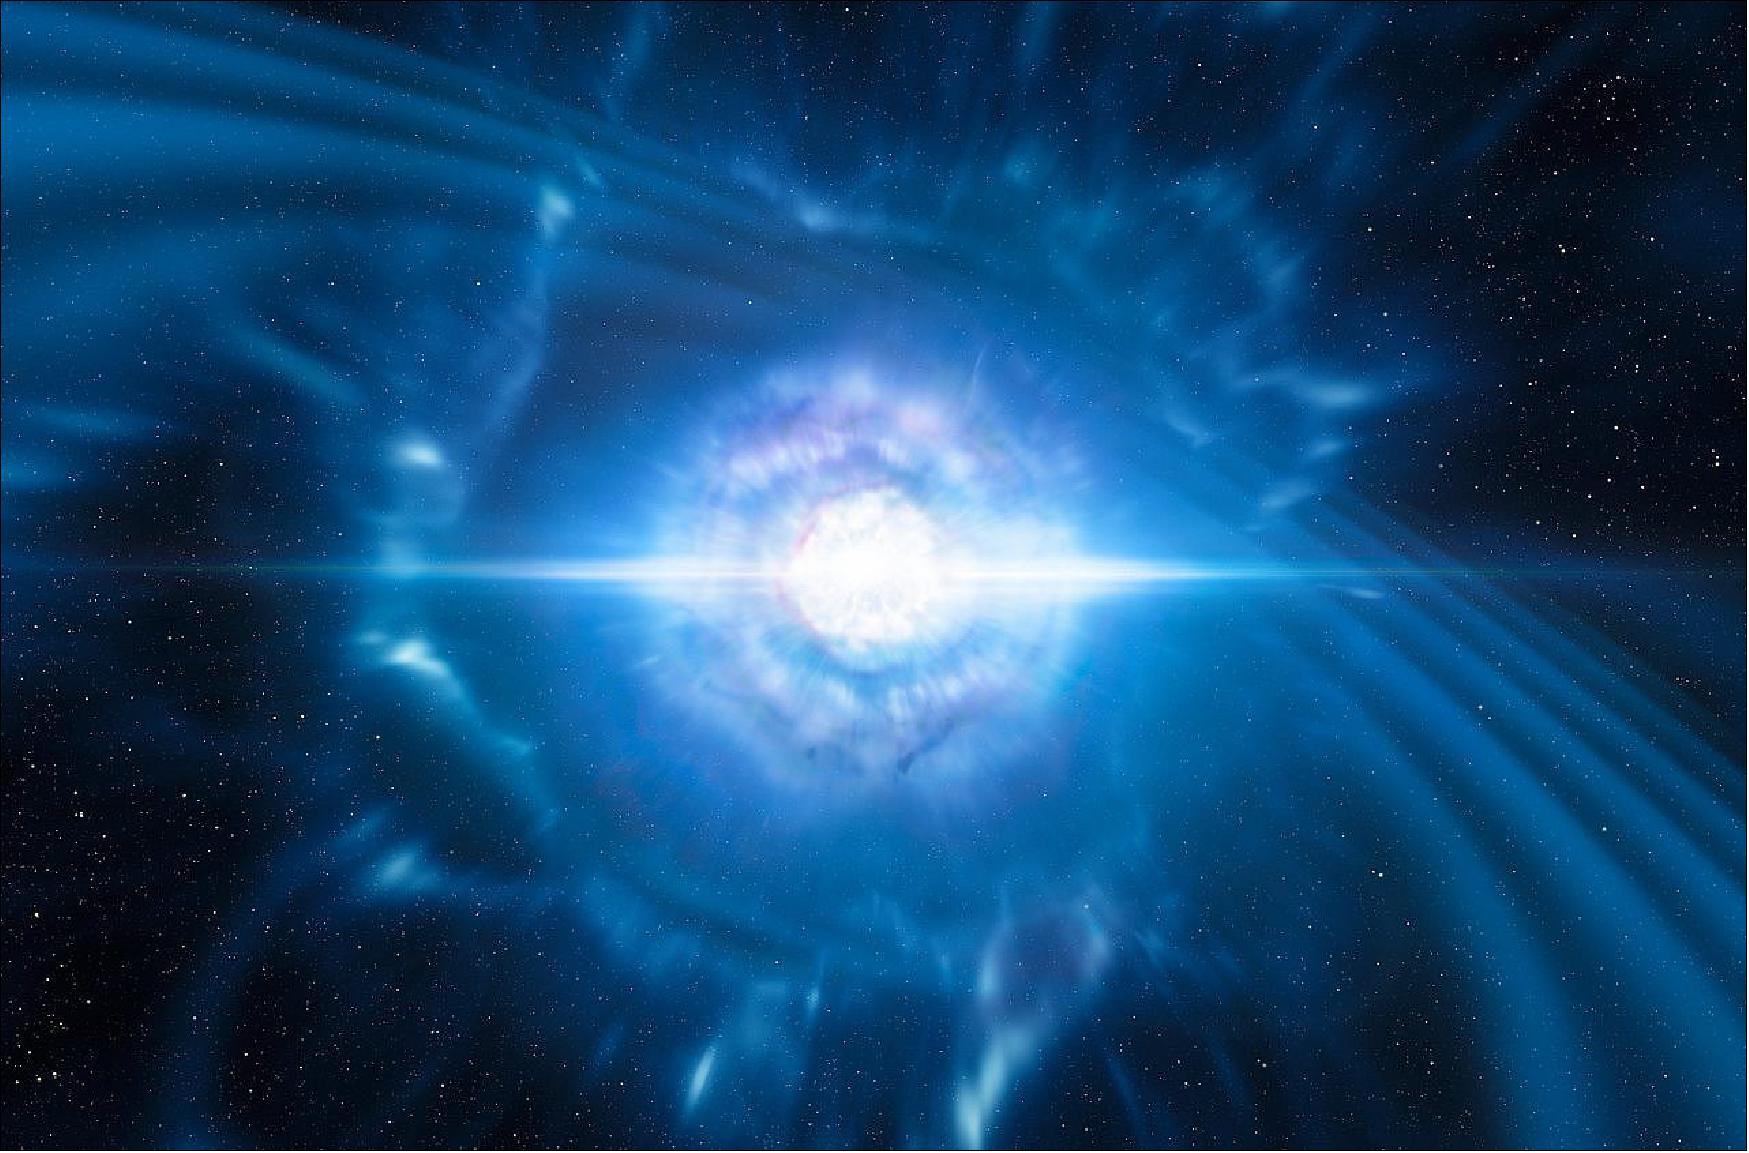 Figure 36: This artist’s impression shows two tiny but very dense neutron stars at the point at which they merge and explode as a kilonova. Such a very rare event is expected to produce both gravitational waves and a short gamma-ray burst, both of which were observed on 17 August 2017 by LIGO–Virgo and Fermi/INTEGRAL respectively. Subsequent detailed observations with many ESO telescopes confirmed that this object, seen in the galaxy NGC 4993 about 130 million light-years from the Earth, is indeed a kilonova. Such objects are the main source of very heavy chemical elements, such as gold and platinum, in the Universe (image credit: ESO/L. Calçada/M. Kornmesser)